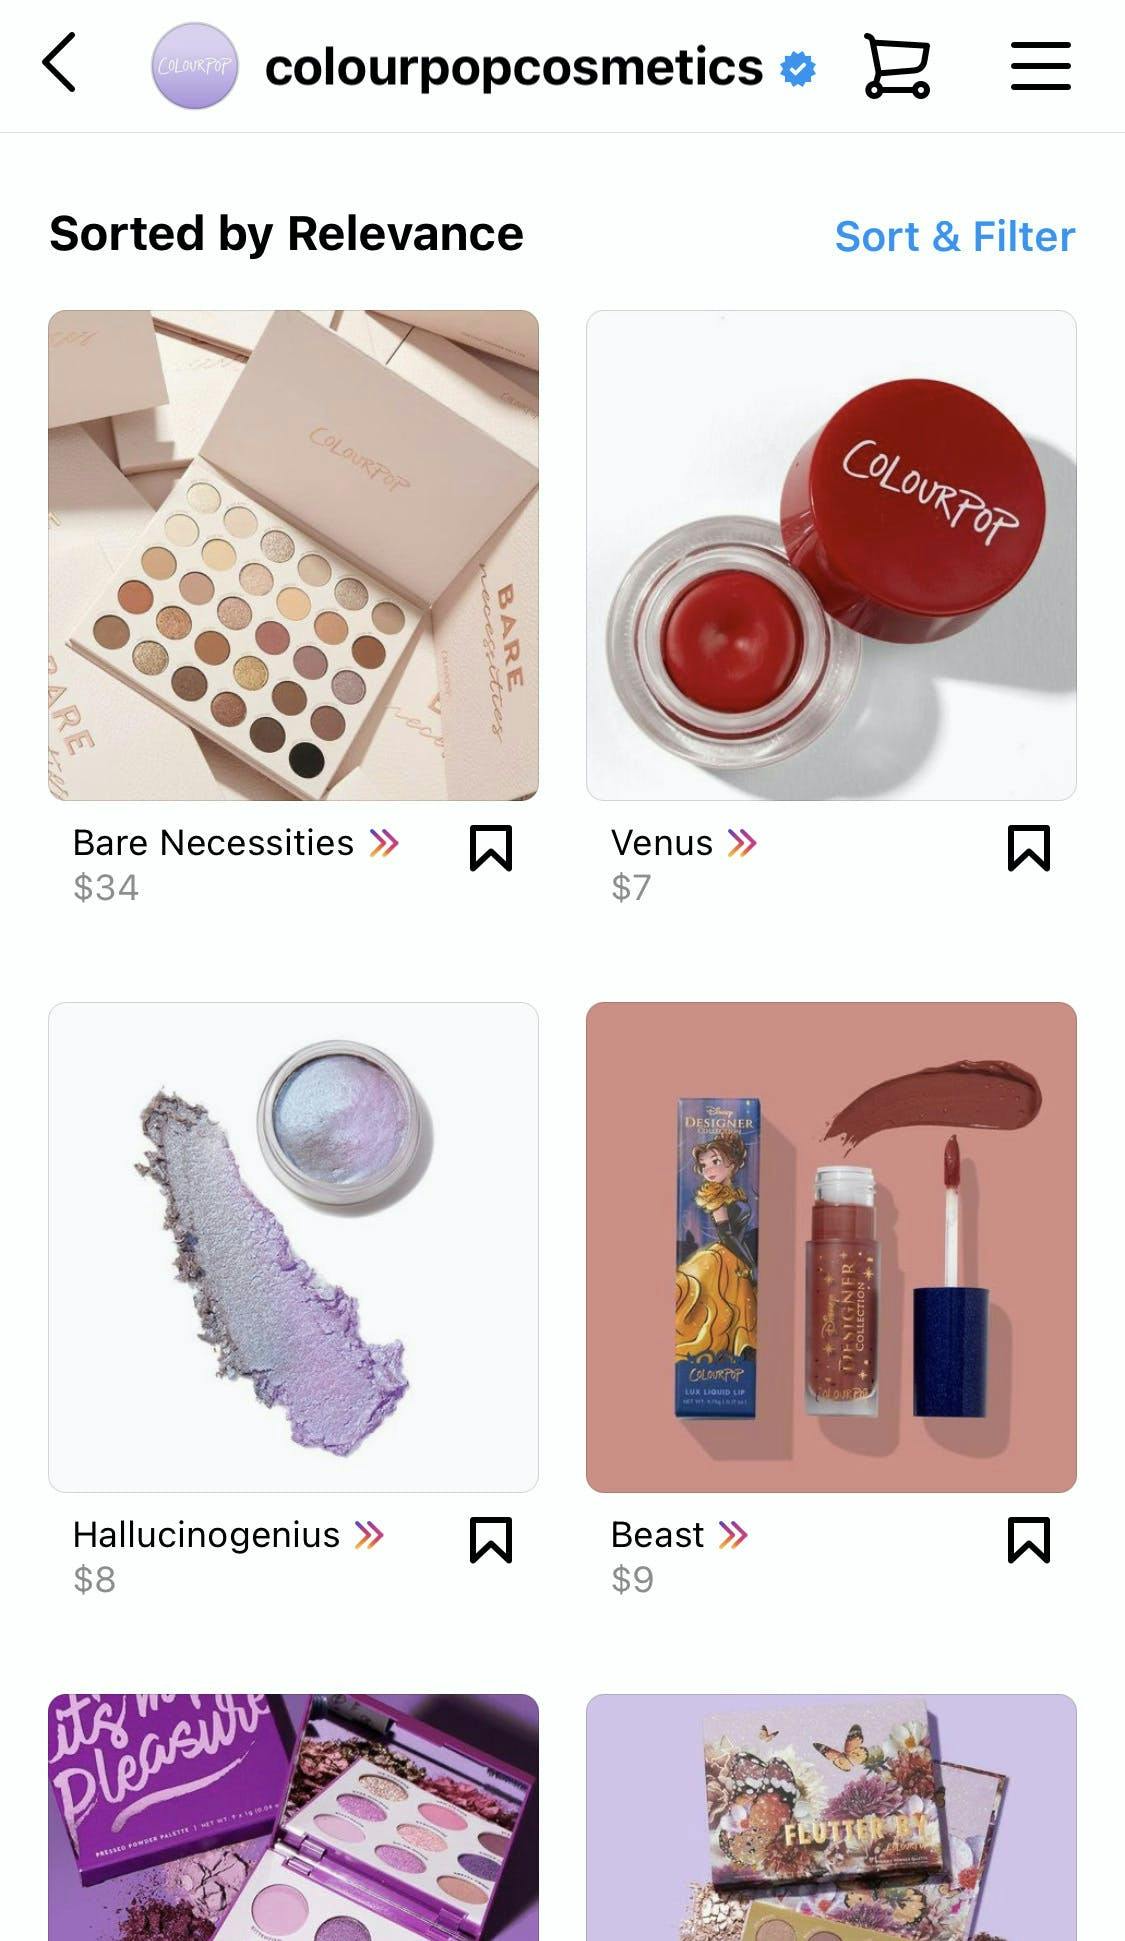 Instagram cosmetics shop showing six thumbnails with different products that can be purchases within the Instagram app